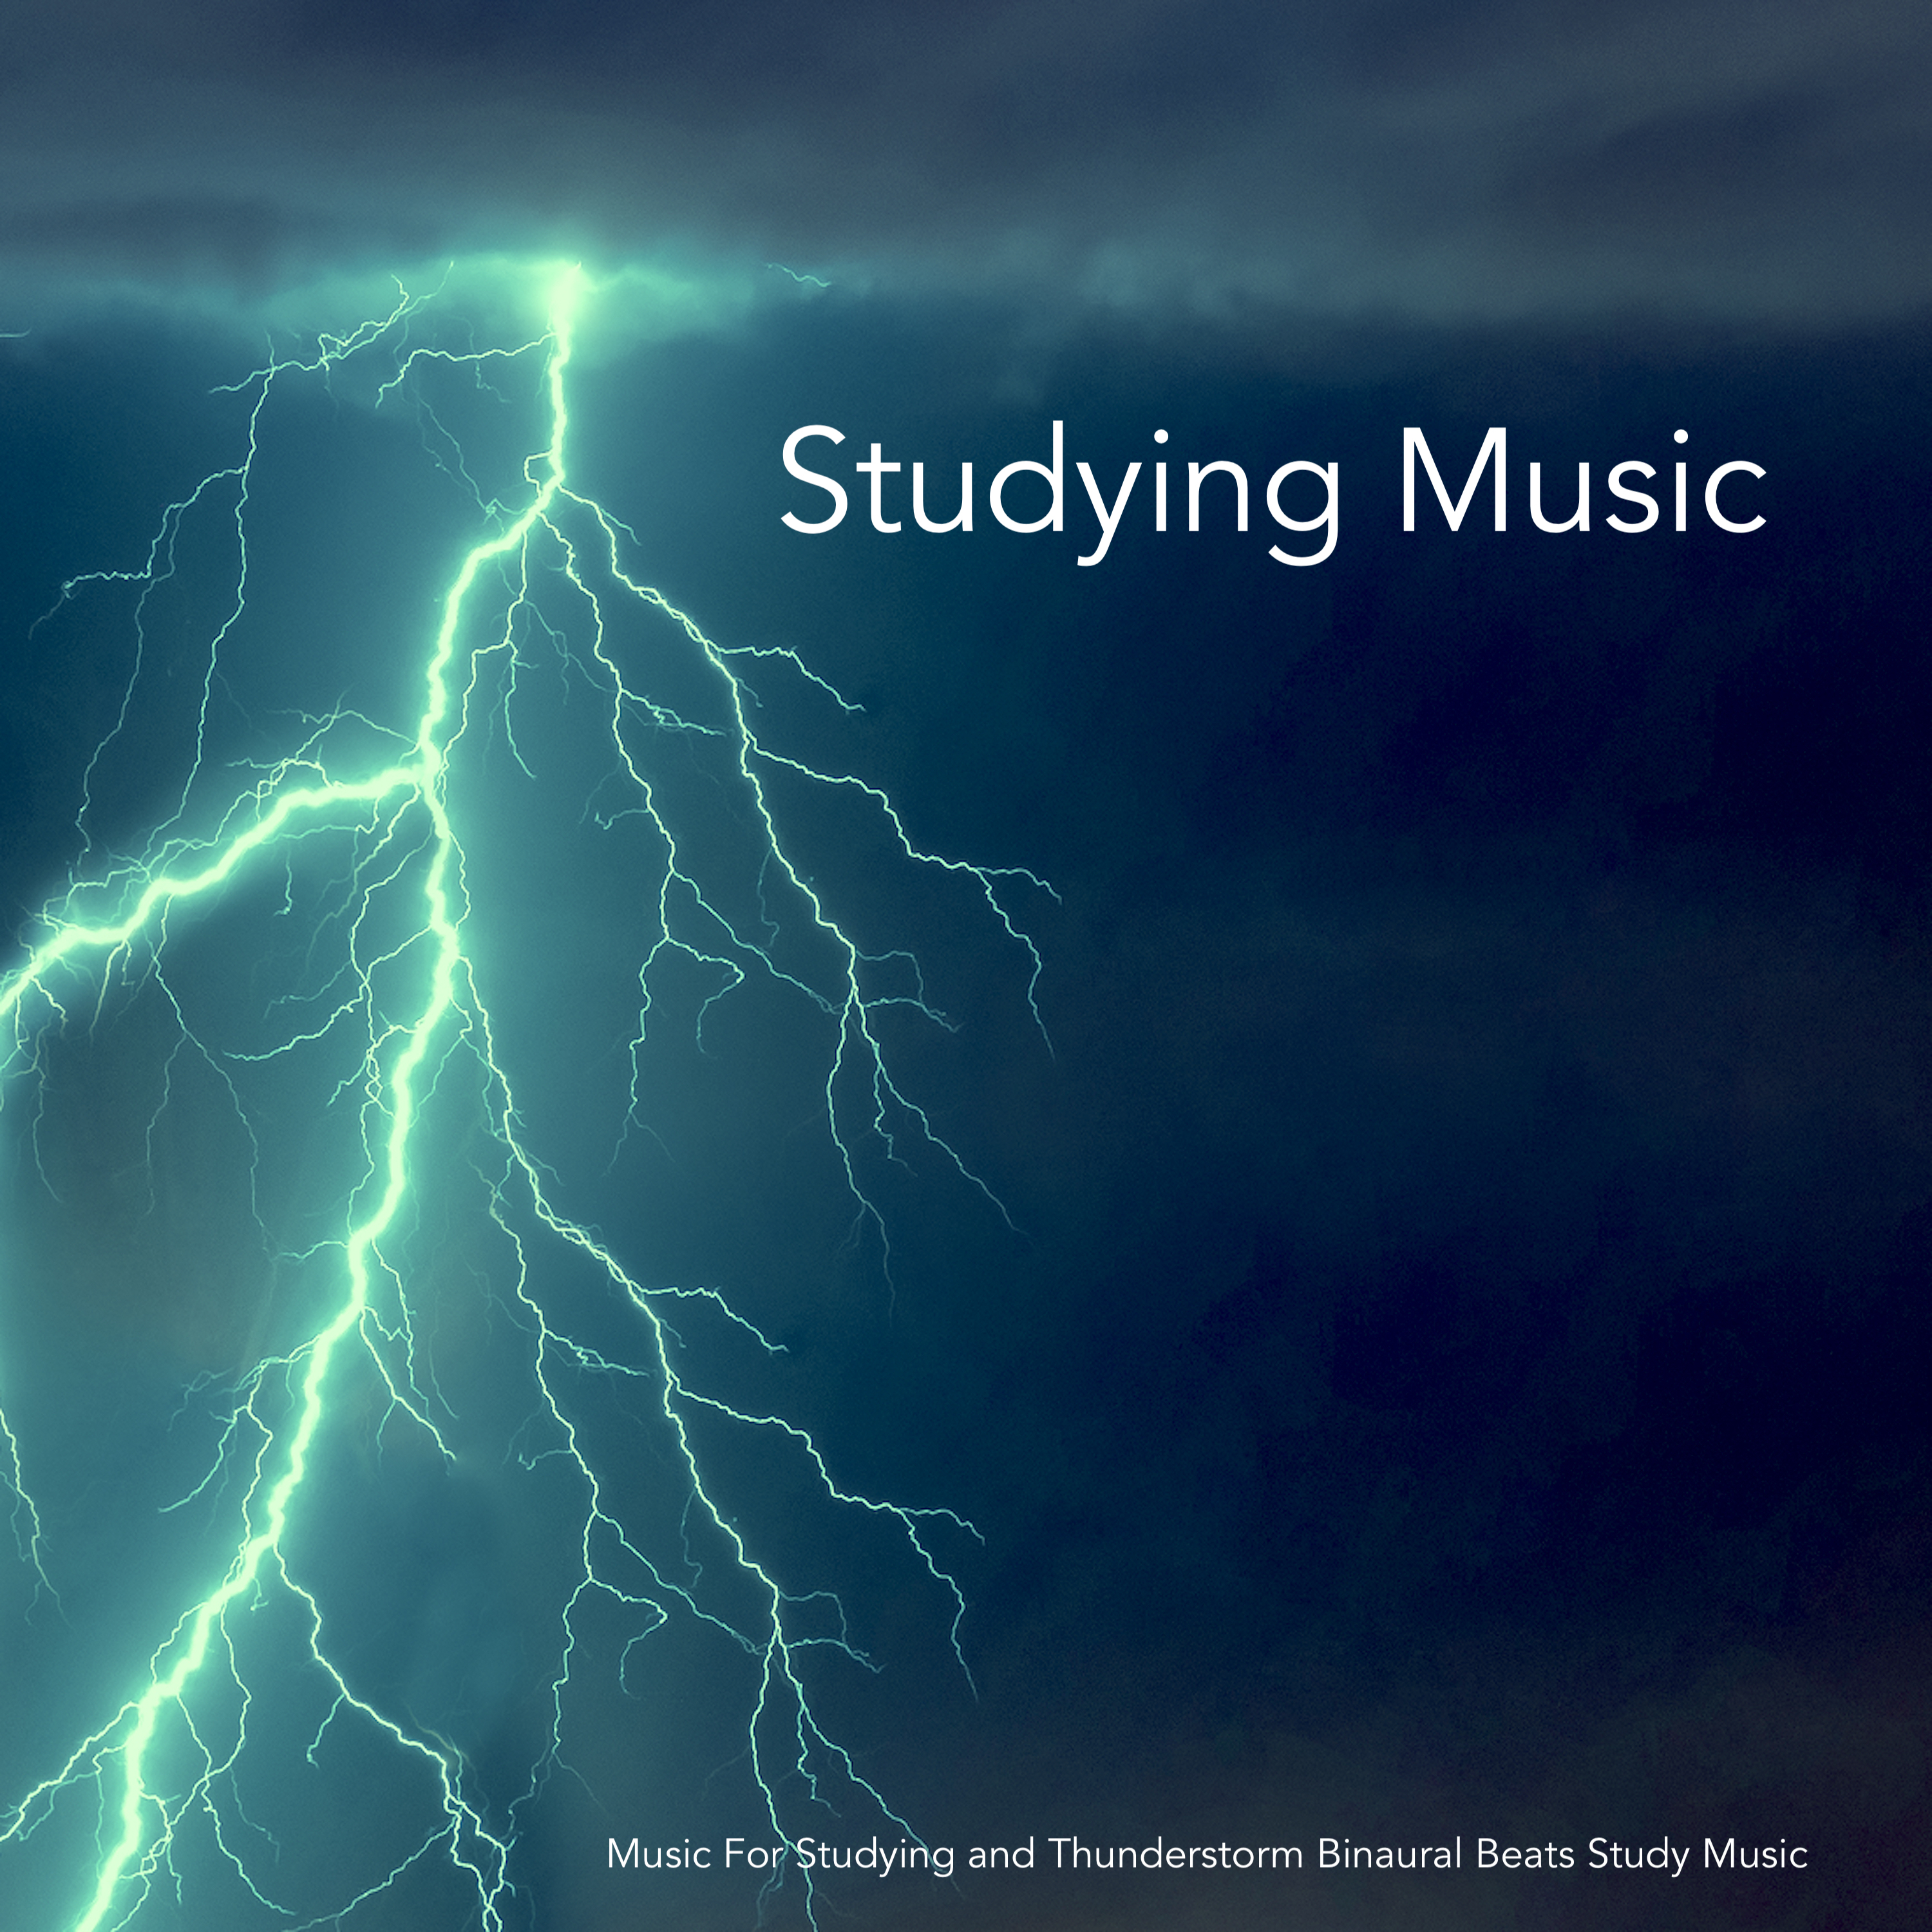 Studying Music: Music For Studying and Thunderstorm Binaural Beats Study Music